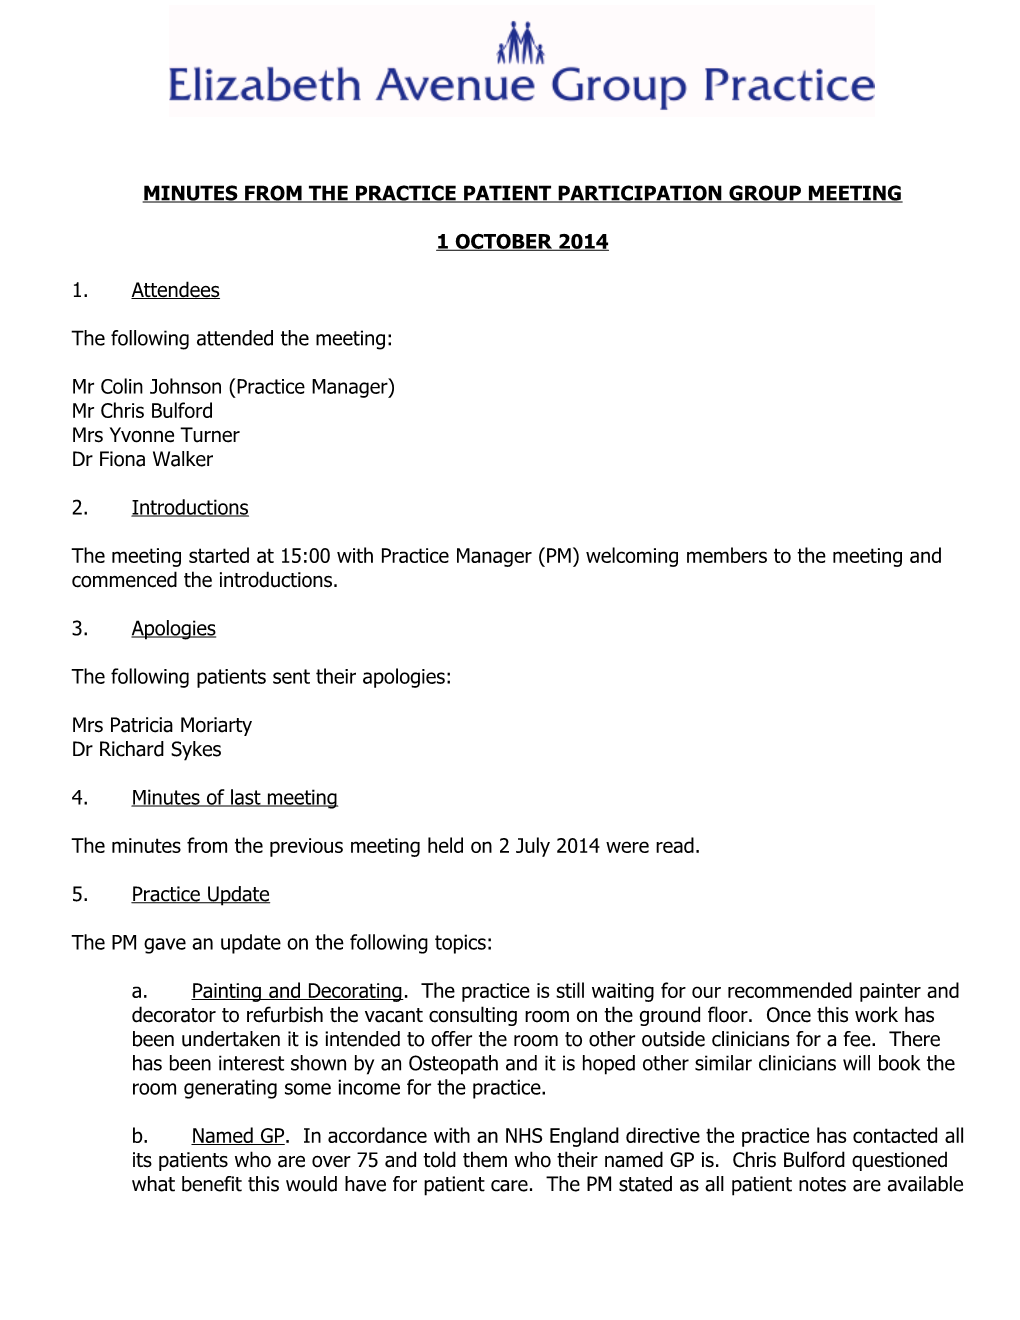 Minutes from the Practice Patient Participation Group Meeting